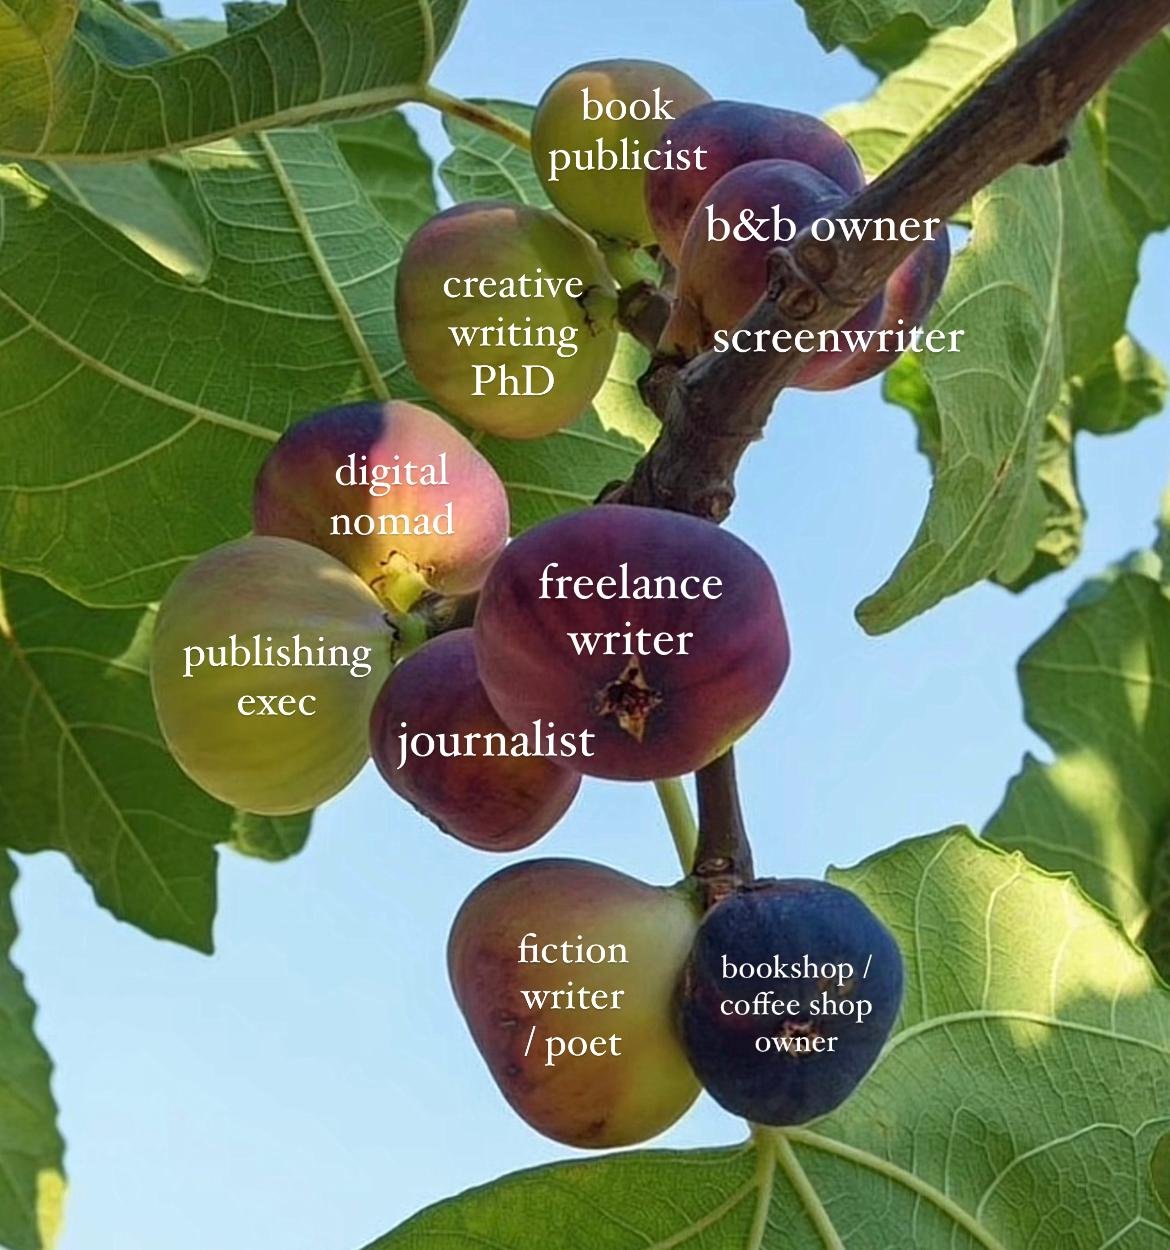 What's on your fig tree? 🌱 The audio of this quote from The Bell Jar by Sylvia Plath is trending on TikTok right now:

&ldquo;I saw my life branching out before me like the green fig tree in the story. From the tip of every branch, like a fat purple